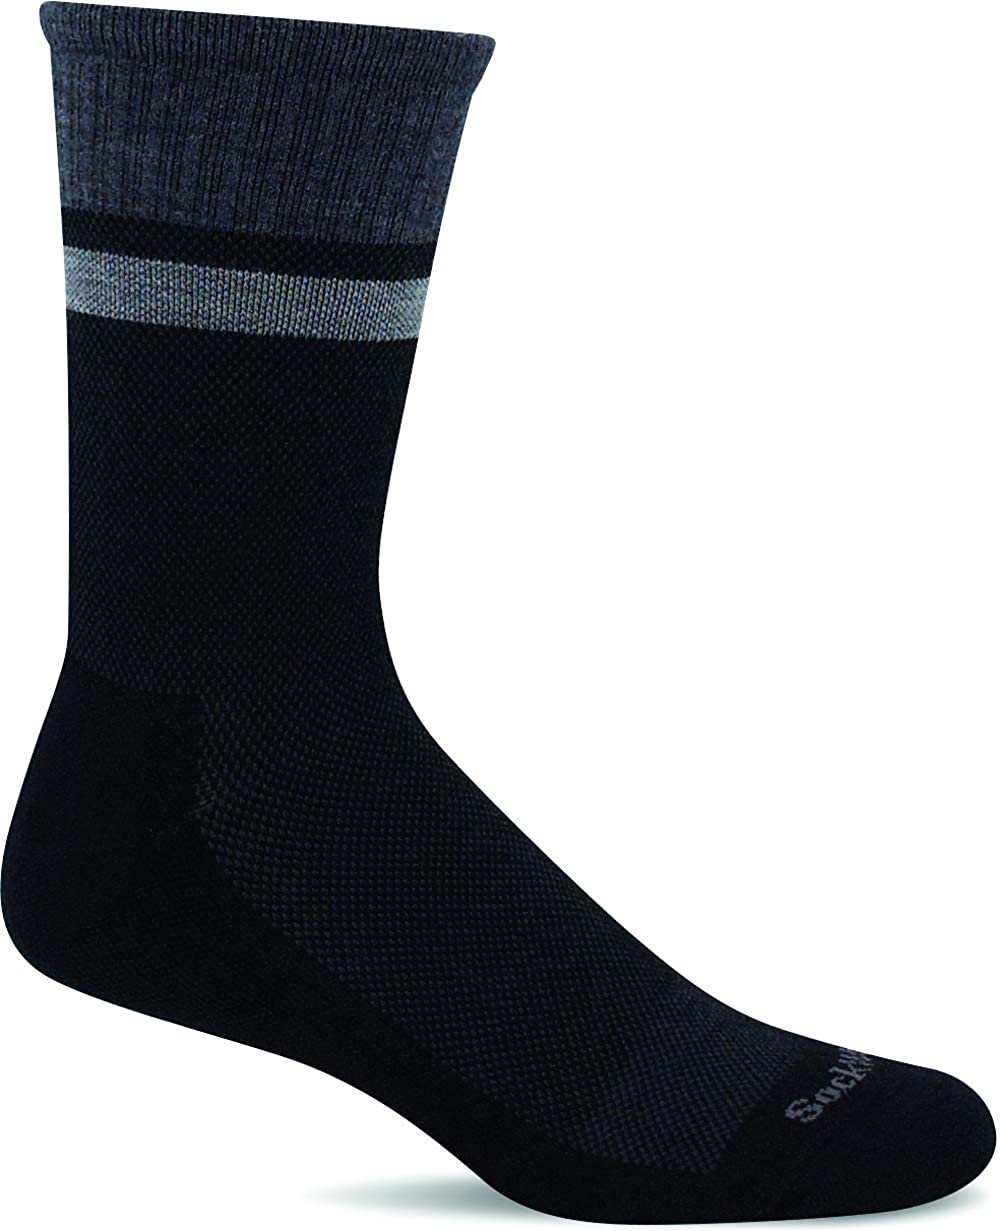 Sockwell Men's Foothold Crew Moderate Graduated Compression Sock in Black from the side